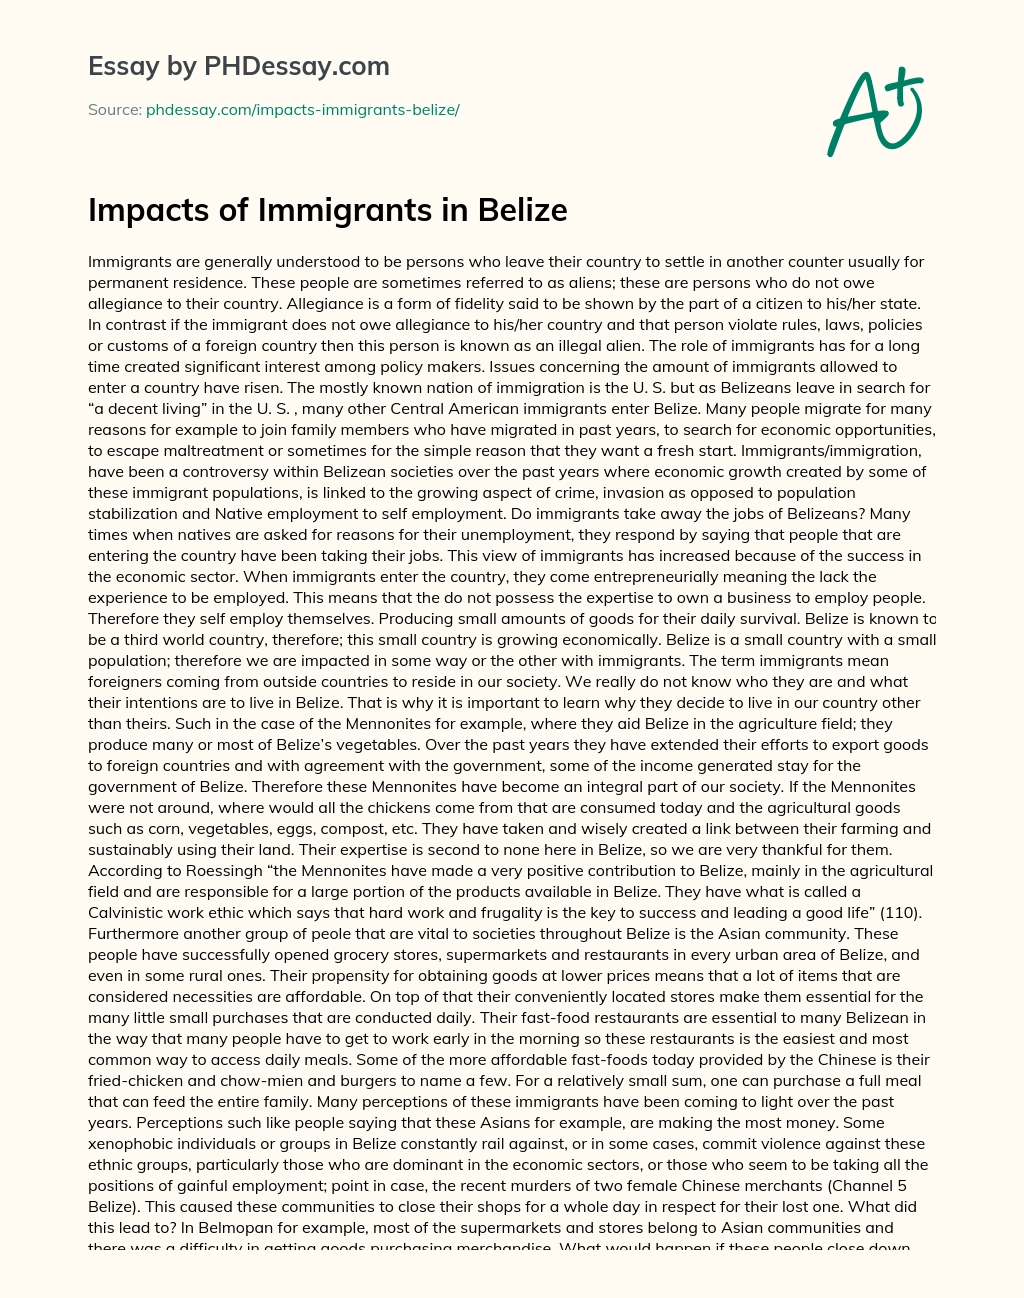 Impacts of Immigrants in Belize essay